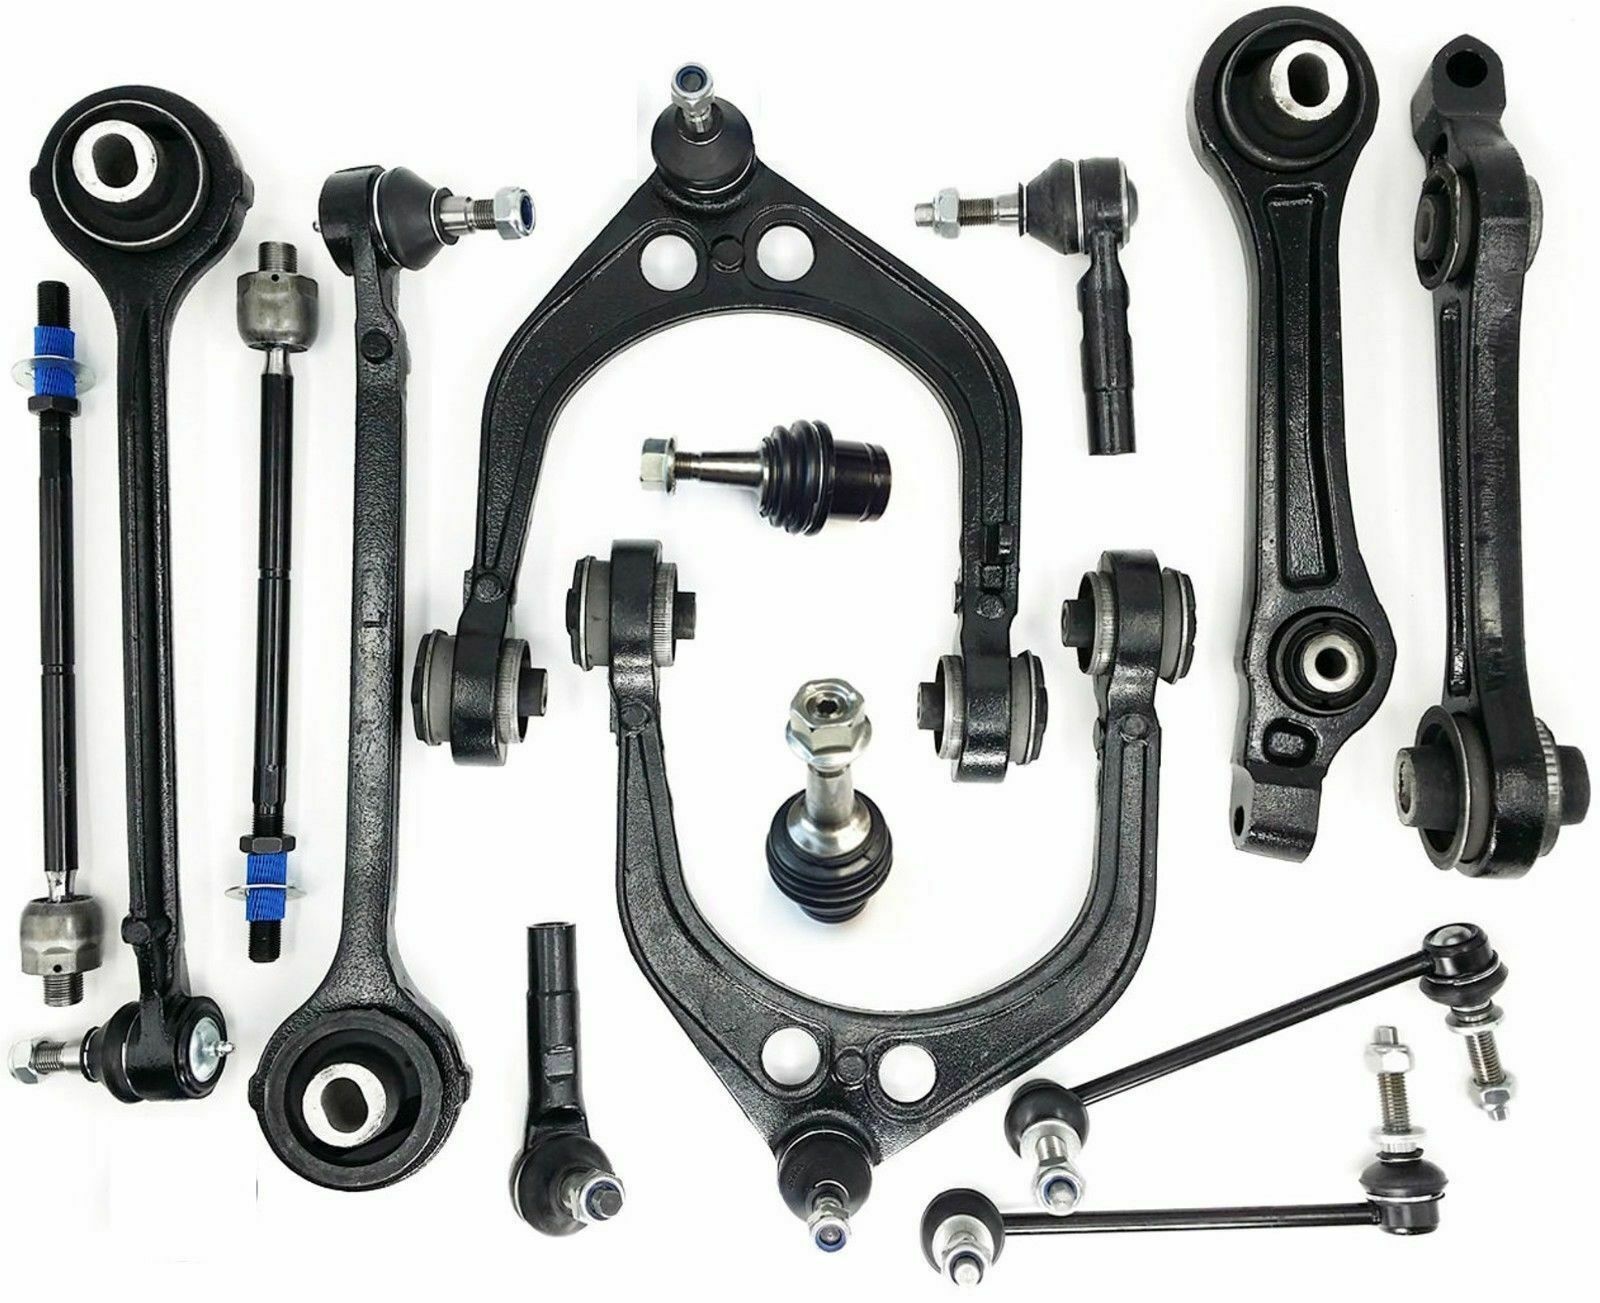 14 New Pc Front Suspension Control Arm Tie Rods Sway Bar Kit For Chrysler Dodge